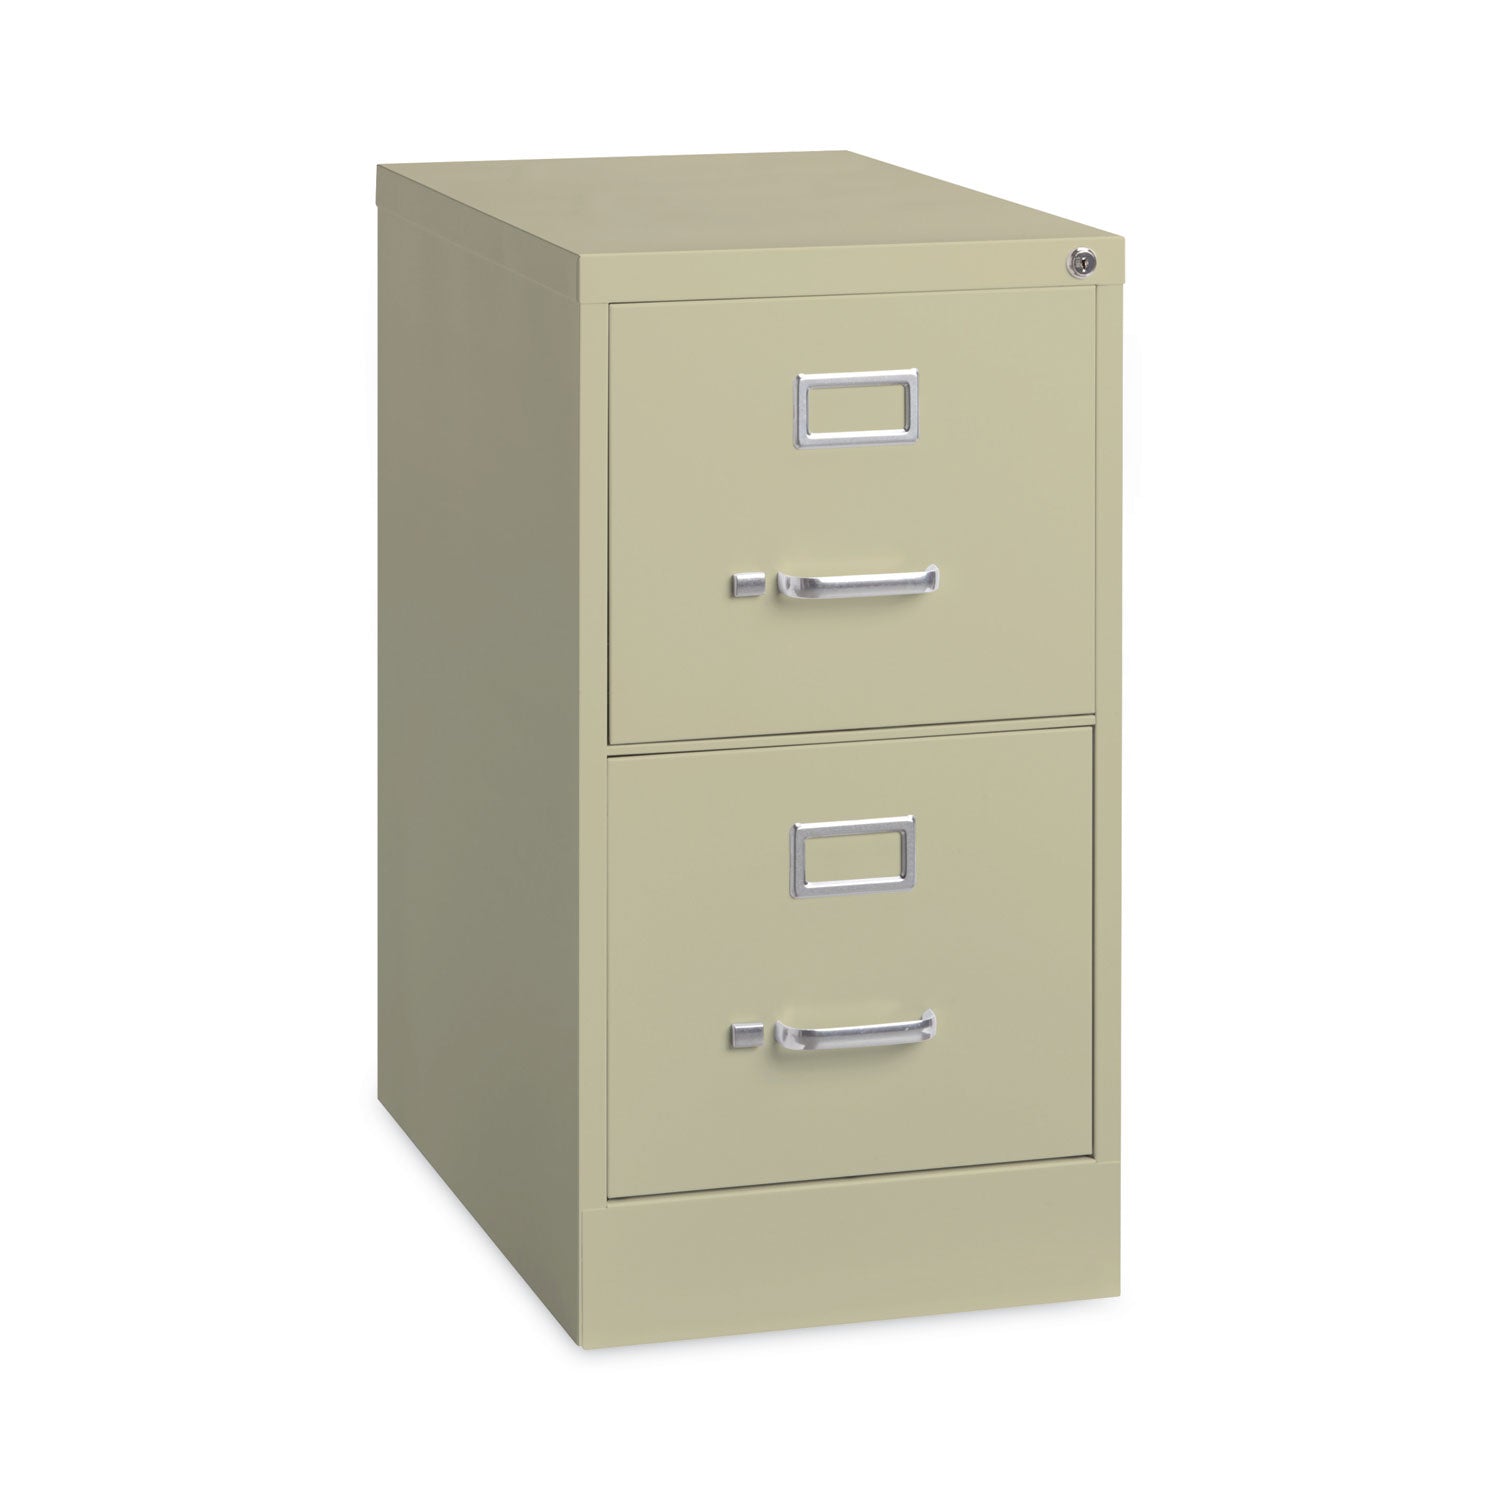 vertical-letter-file-cabinet-2-letter-size-file-drawers-putty-15-x-22-x-2837_hid17889 - 1